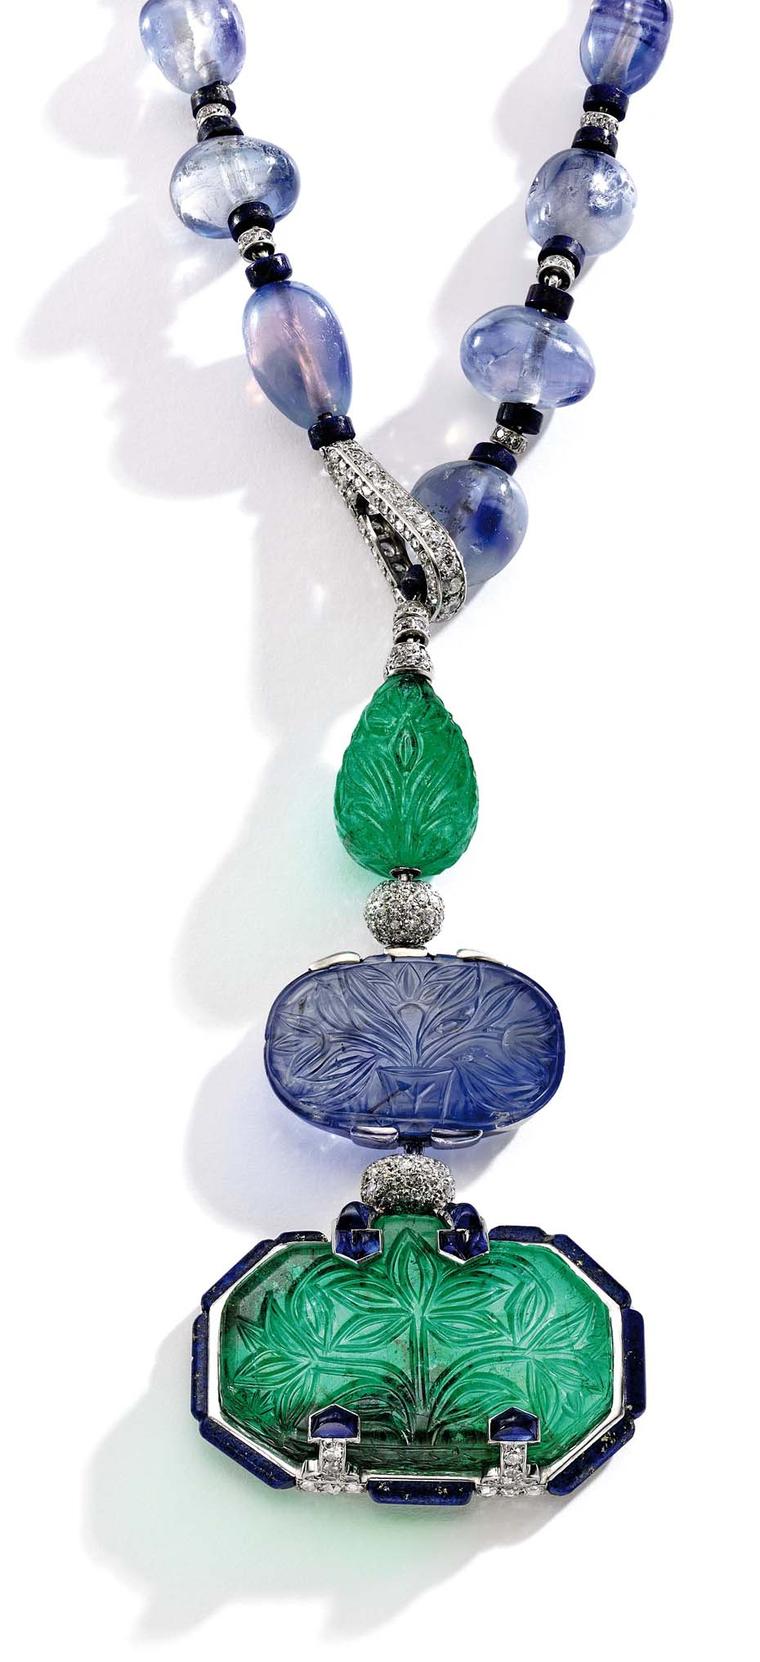 This platinum, emerald, sapphire, lapis lazuli and diamond Cartier necklace, designed by Charles Jacqueau circa 1924, used to belong to the wife of Baron Eugene de Rothschild. It sold to an online bidder for $2.6 million.